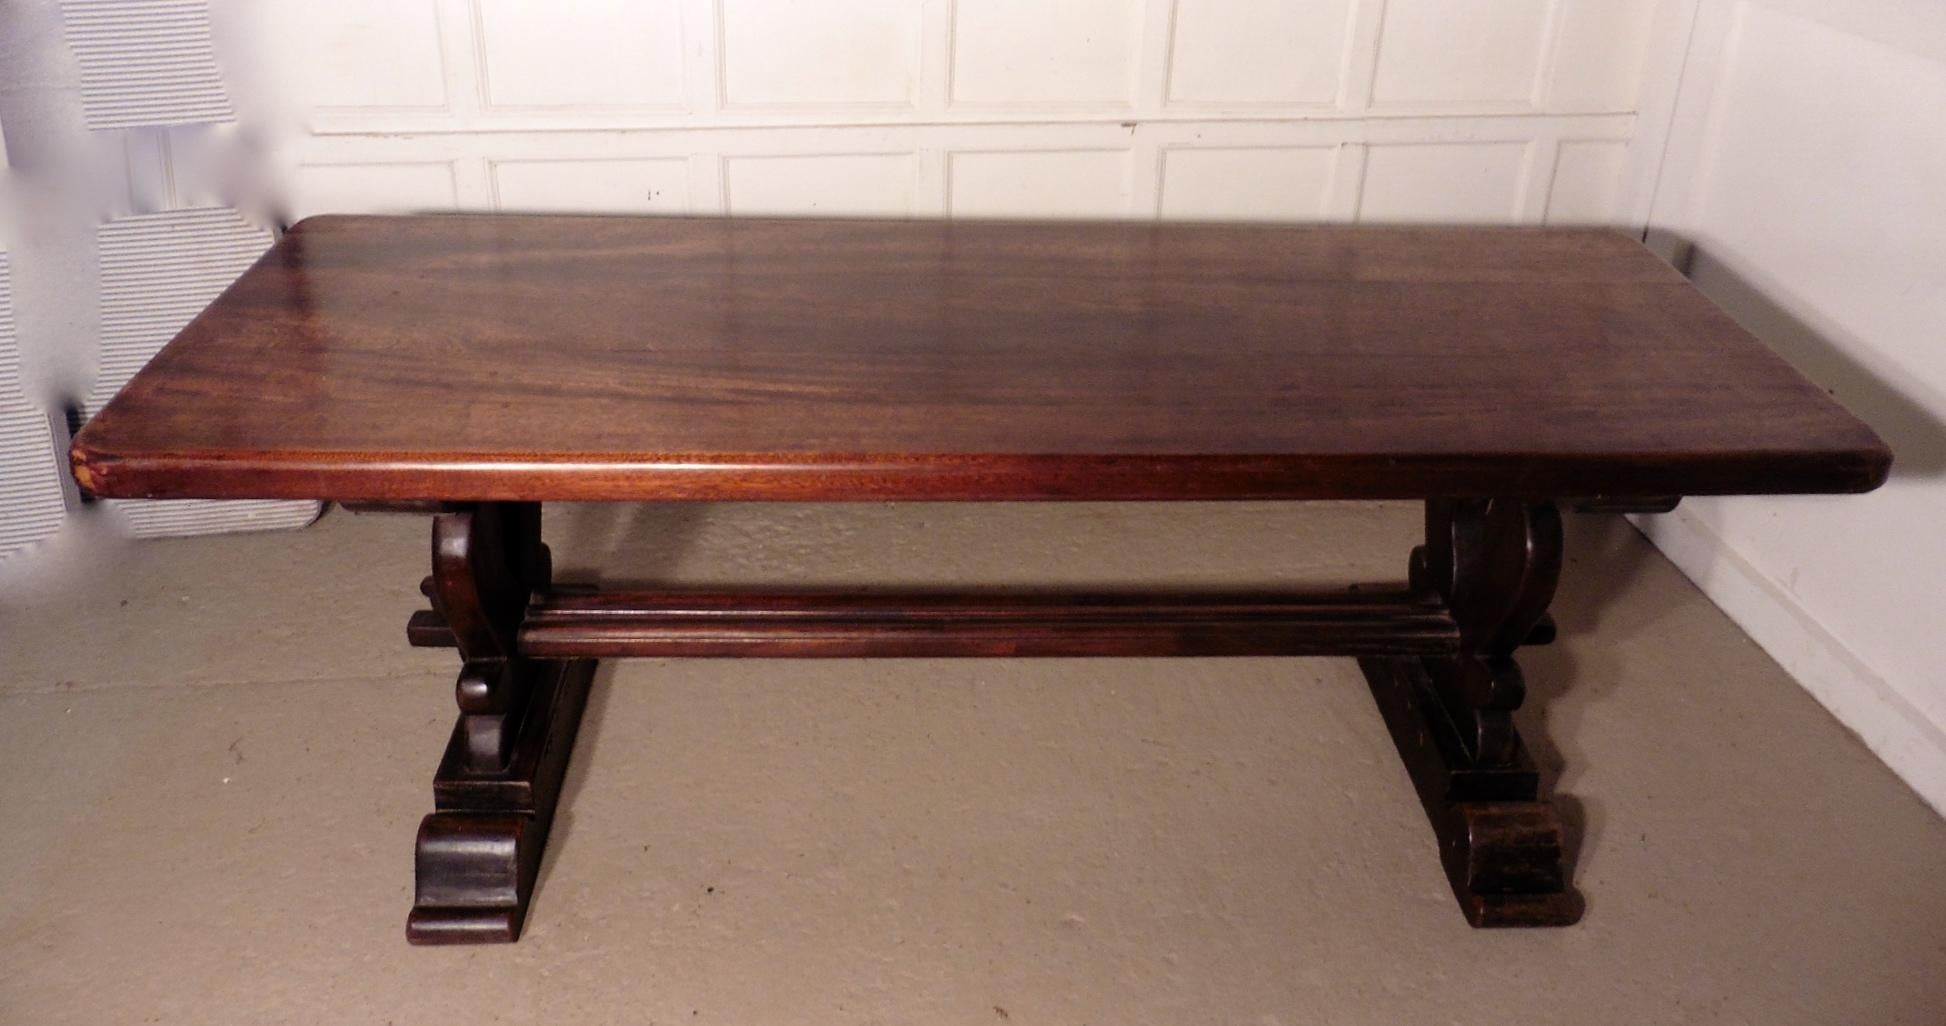 A Large French refectory table, Table Monastère

This is a great piece in both looks and quality, it is a very heavy solid country table, a refectory table from Brittany, the top is made from 2” thick planks. The table is a handmade piece with